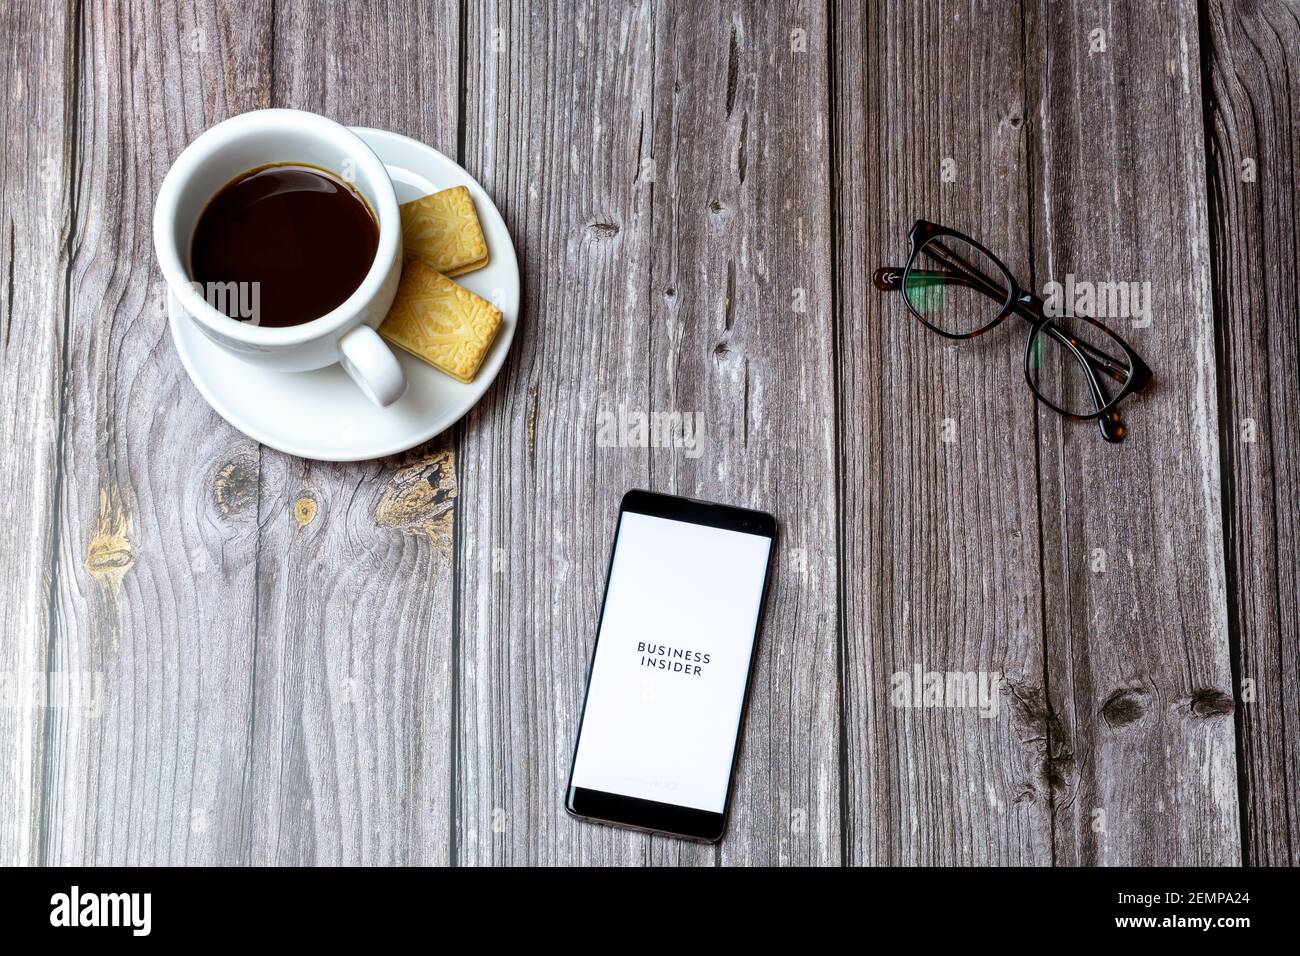 A mobile phone or cell phone on a wooden table with the Business Insider app open next to a coffee and glasses Stock Photo